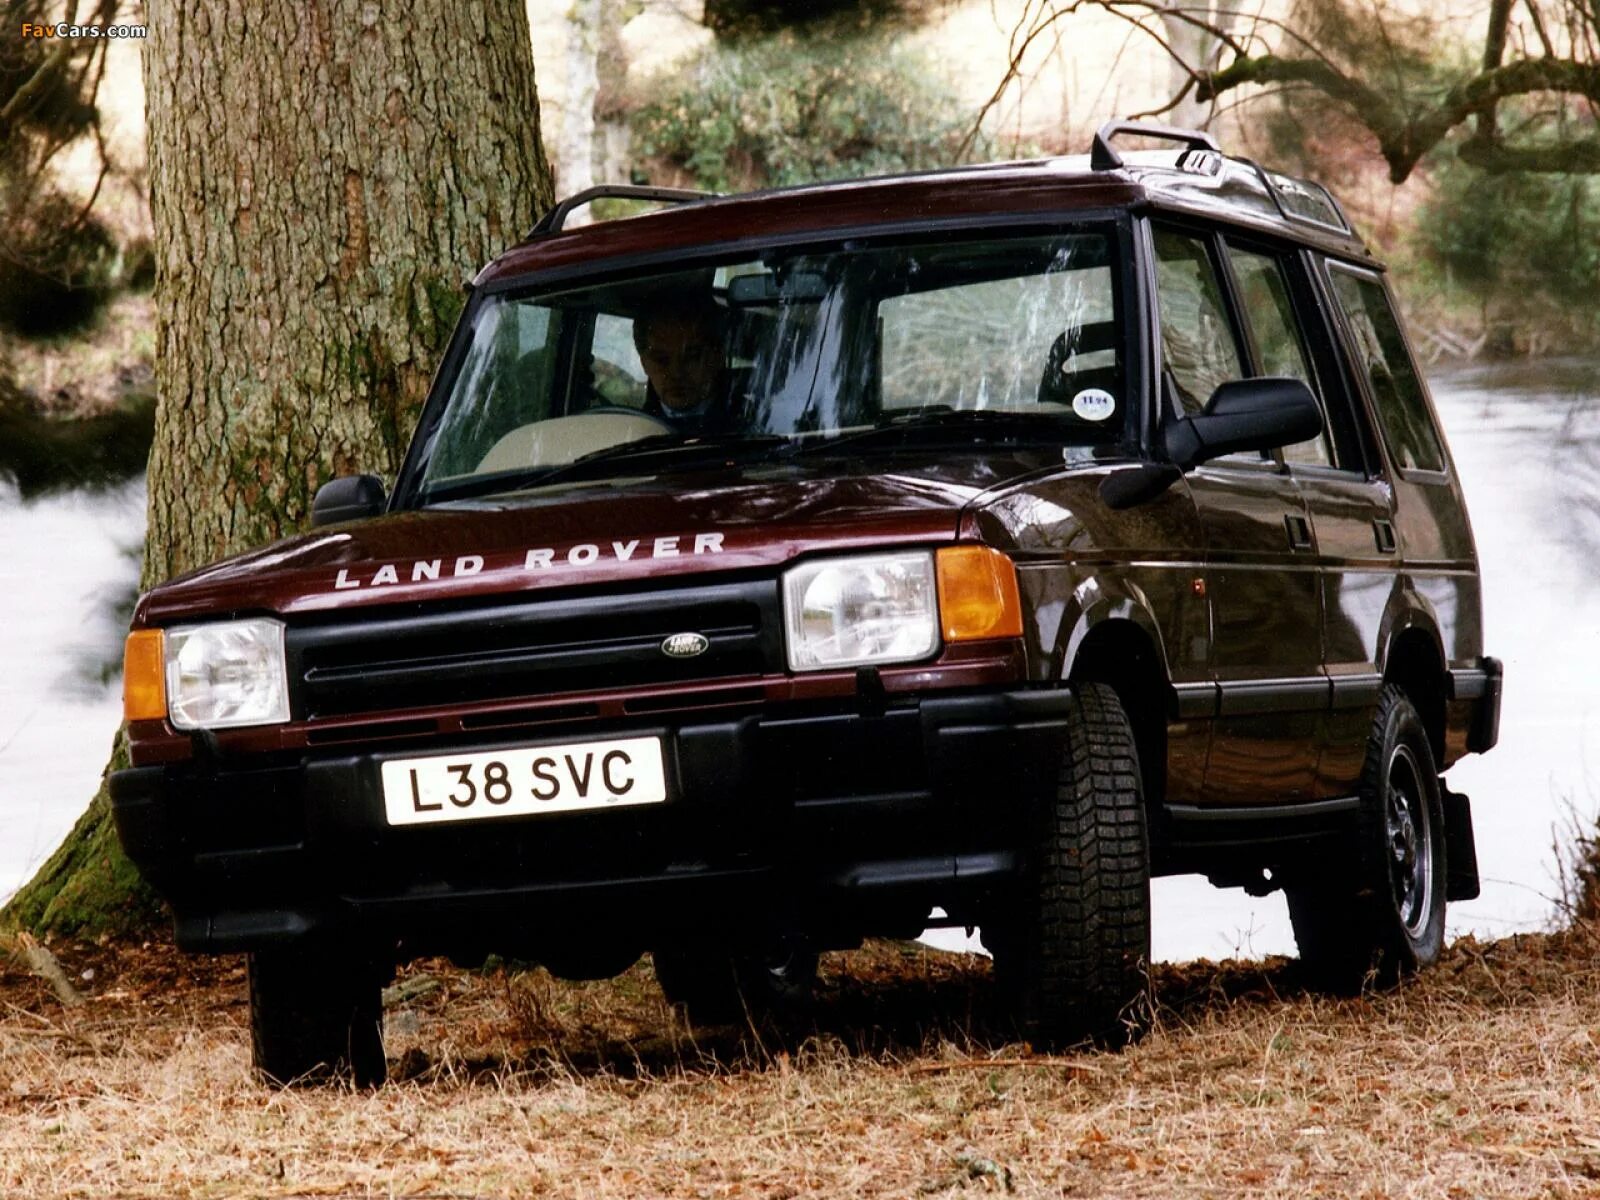 Land Rover Discovery 1. Ленд Ровер Дискавери 1994. Range Rover Discovery 1. Ленд Ровер Дискавери 1990. Дискавери история